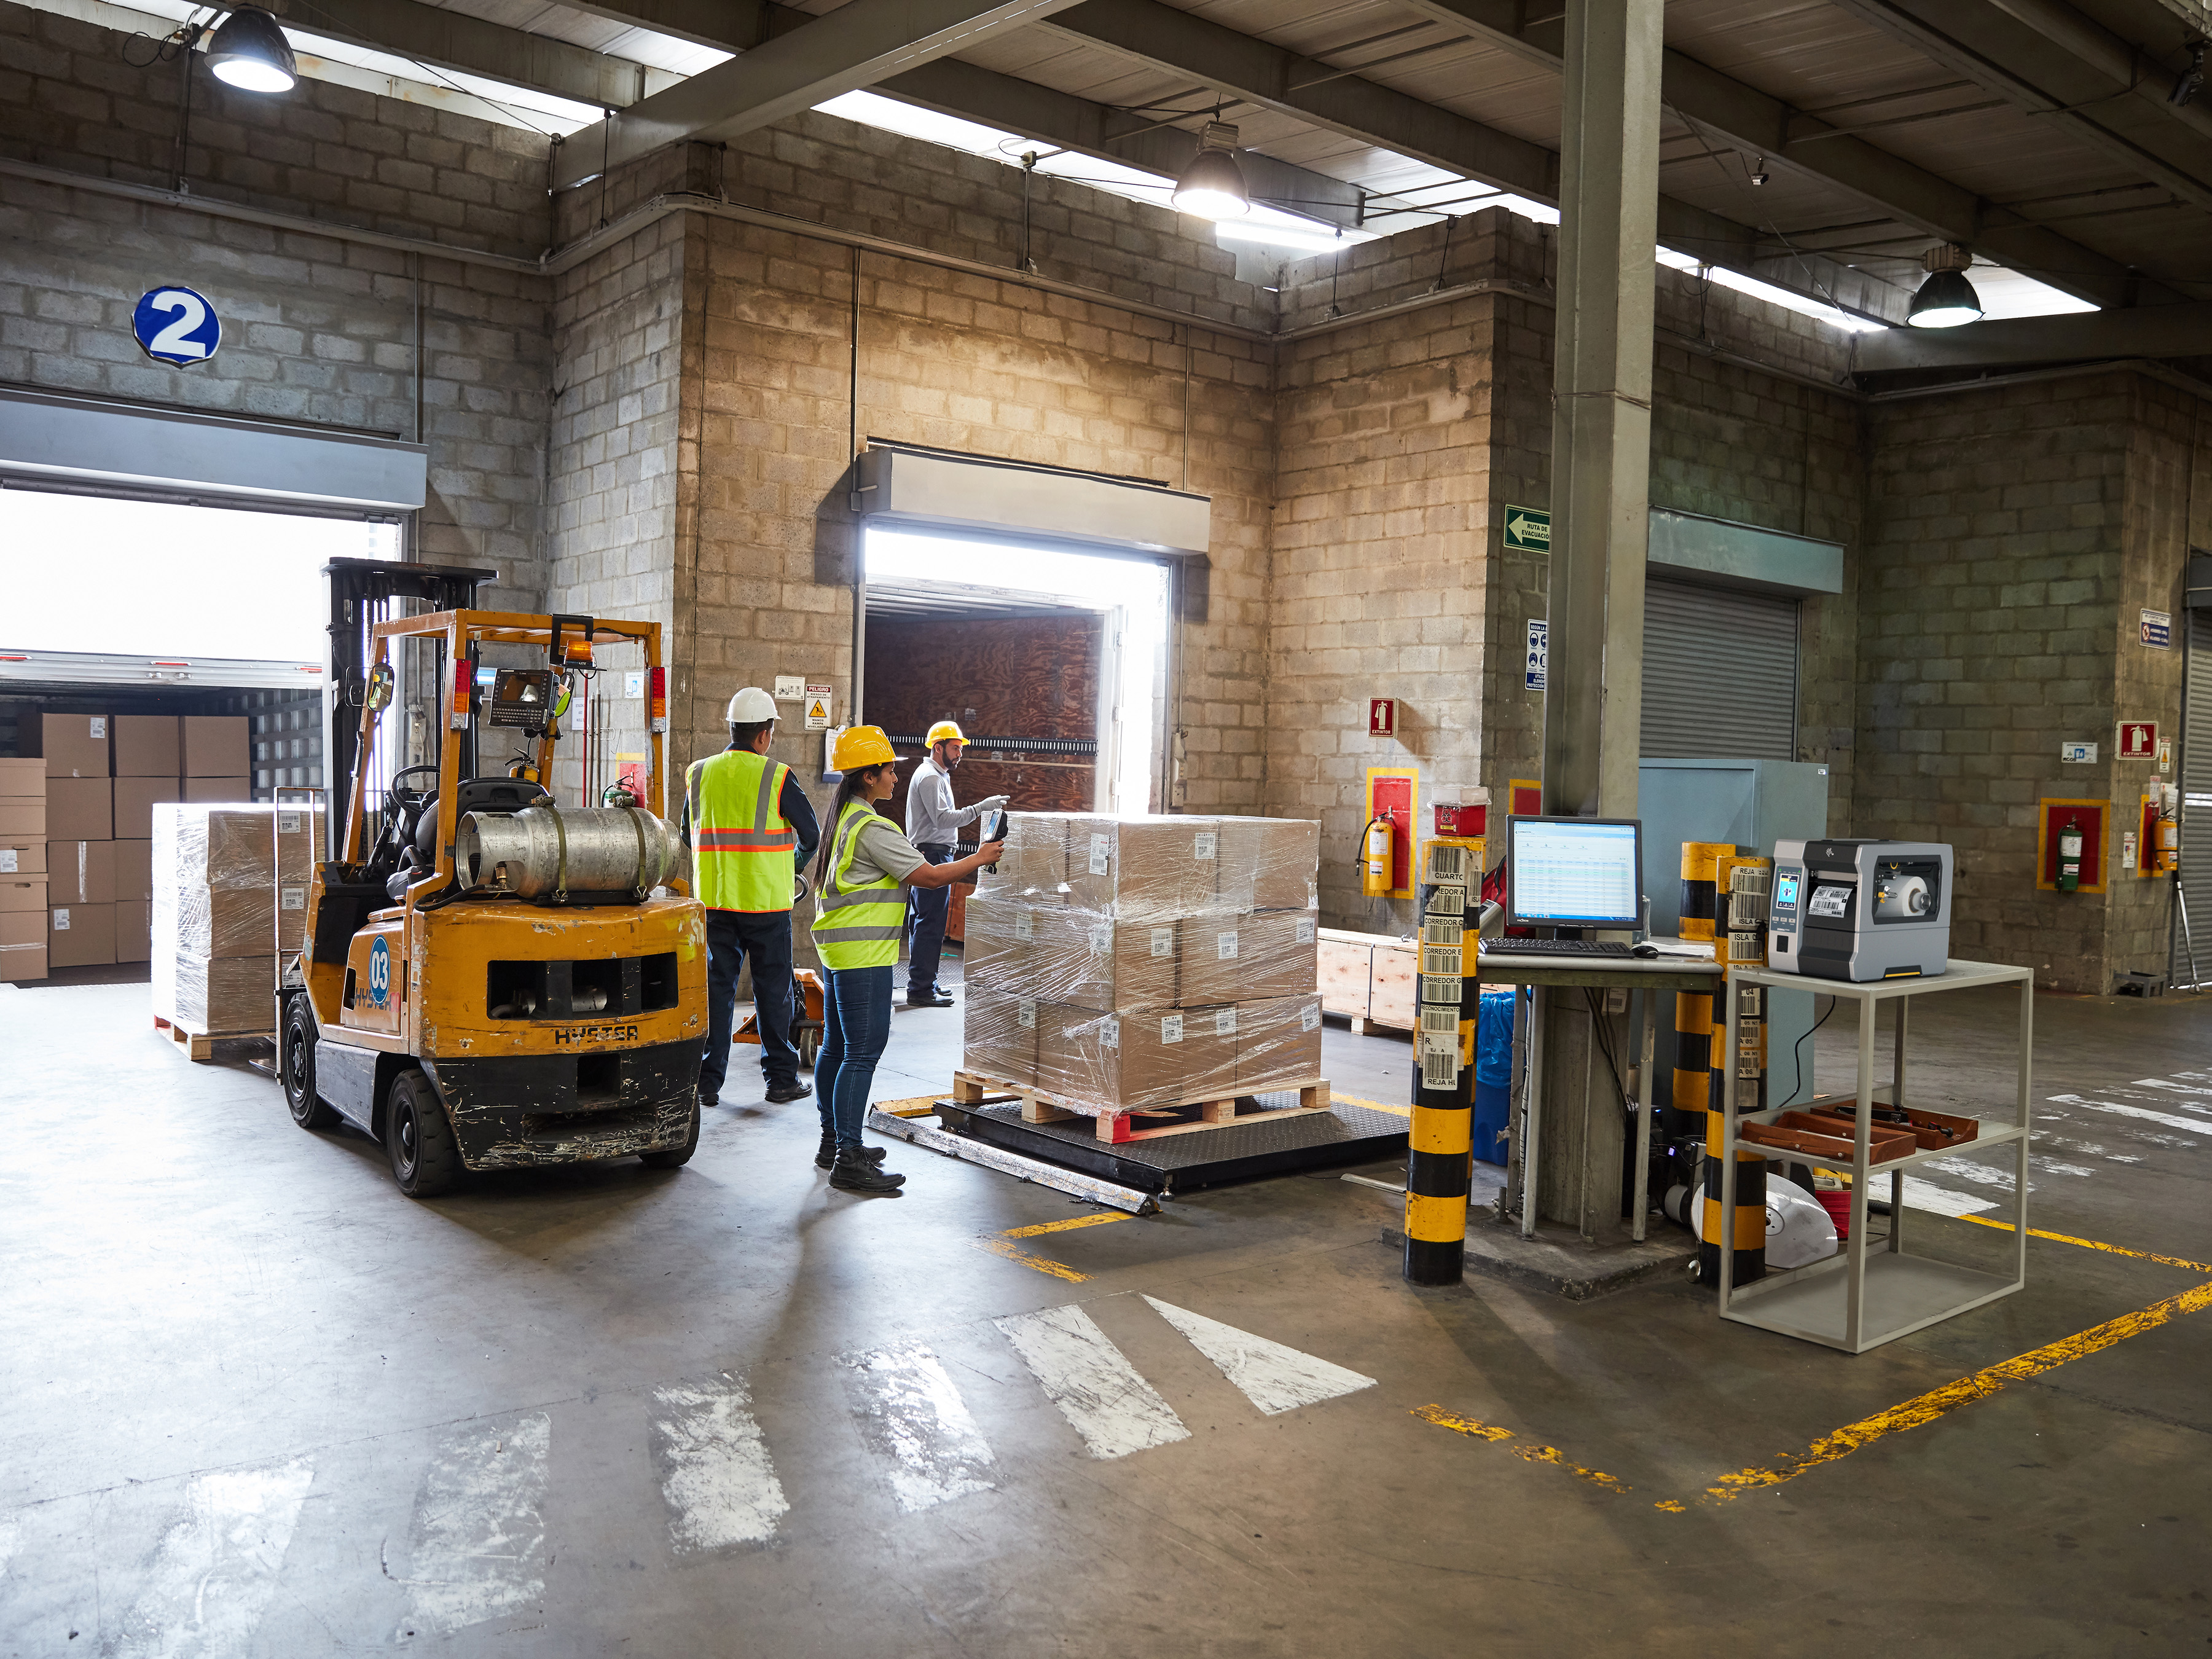 Workers scan products using Zebra devices as they move product at a cross-dock